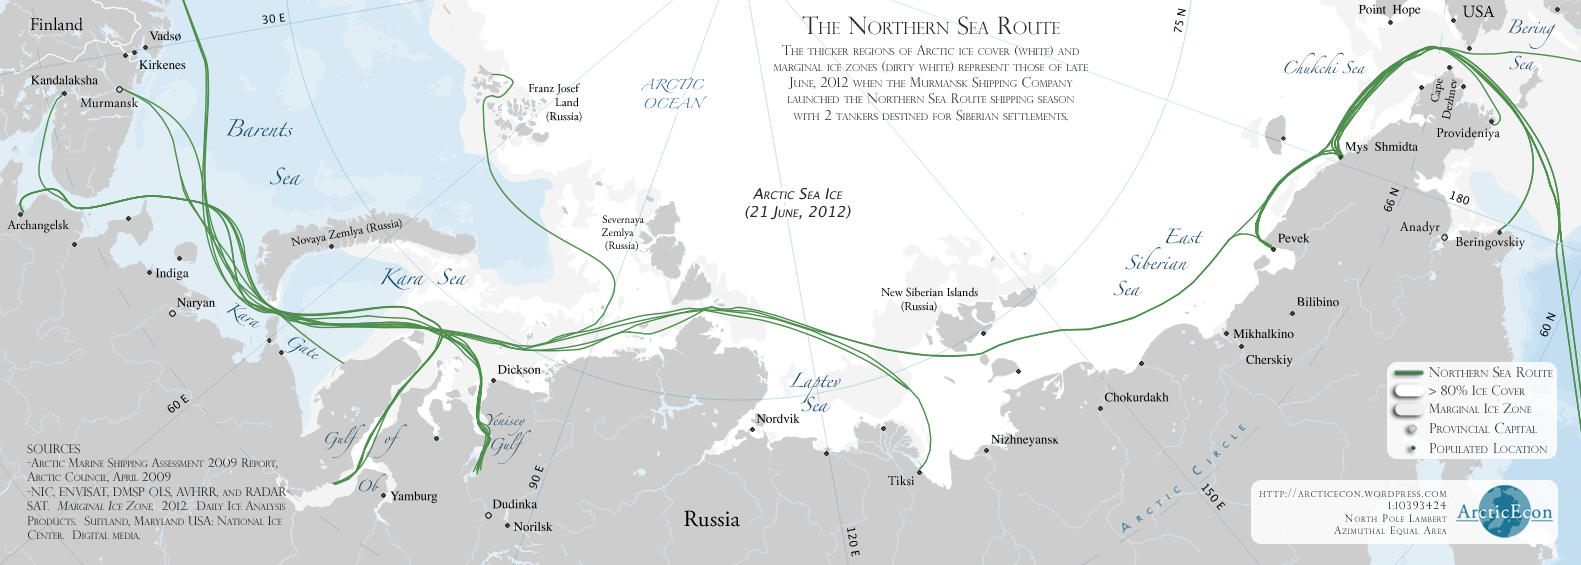 northern-sea-route-2012-russia.png